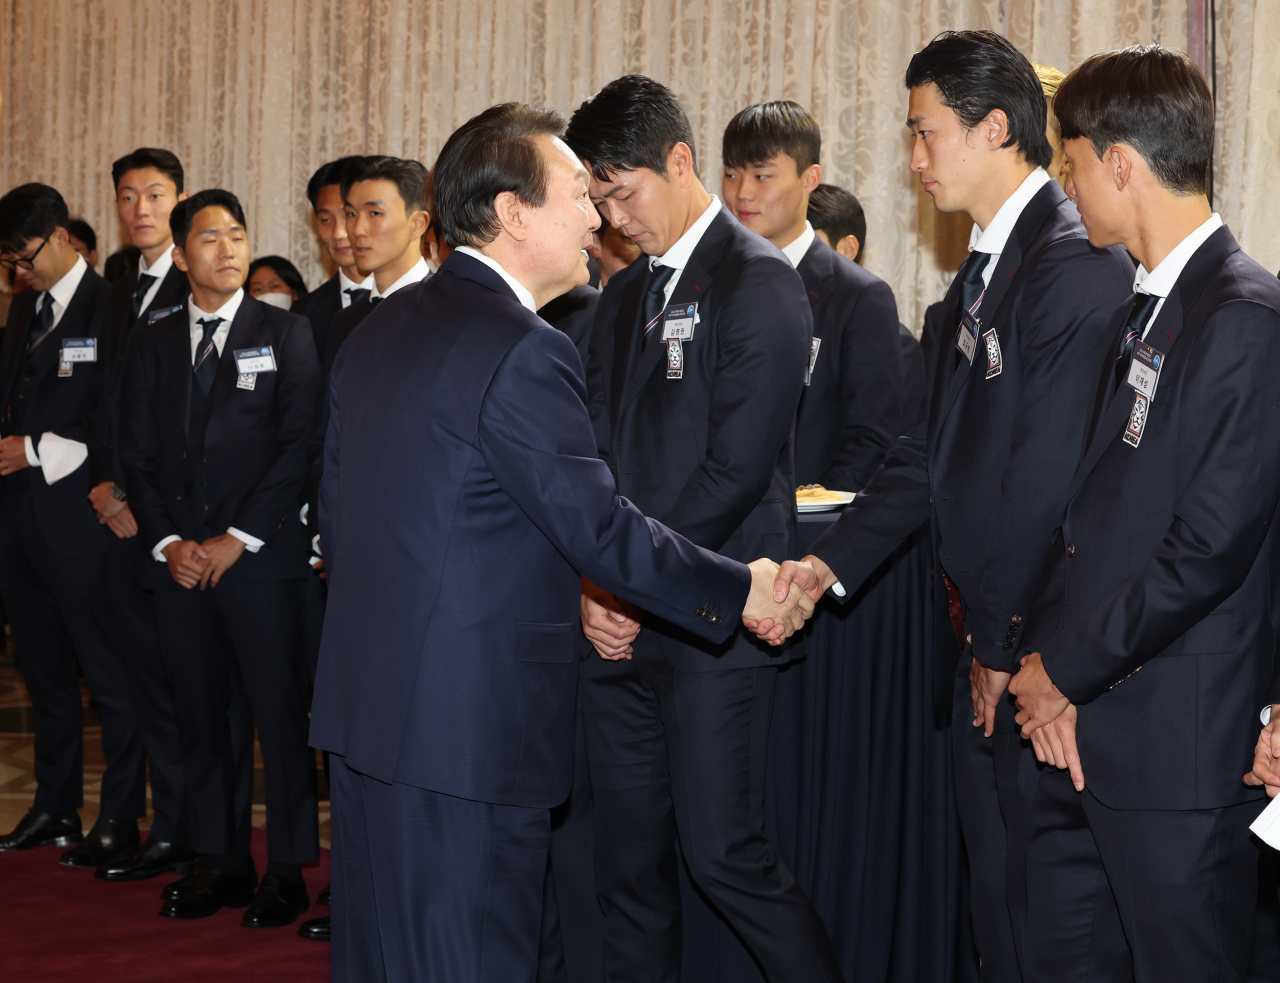 President Yoon Suk-yeol on Thursday hosted a formal dinner for the national soccer team in celebration of the team's performance in the 2022 Qatar World Cup. (Yonhap)